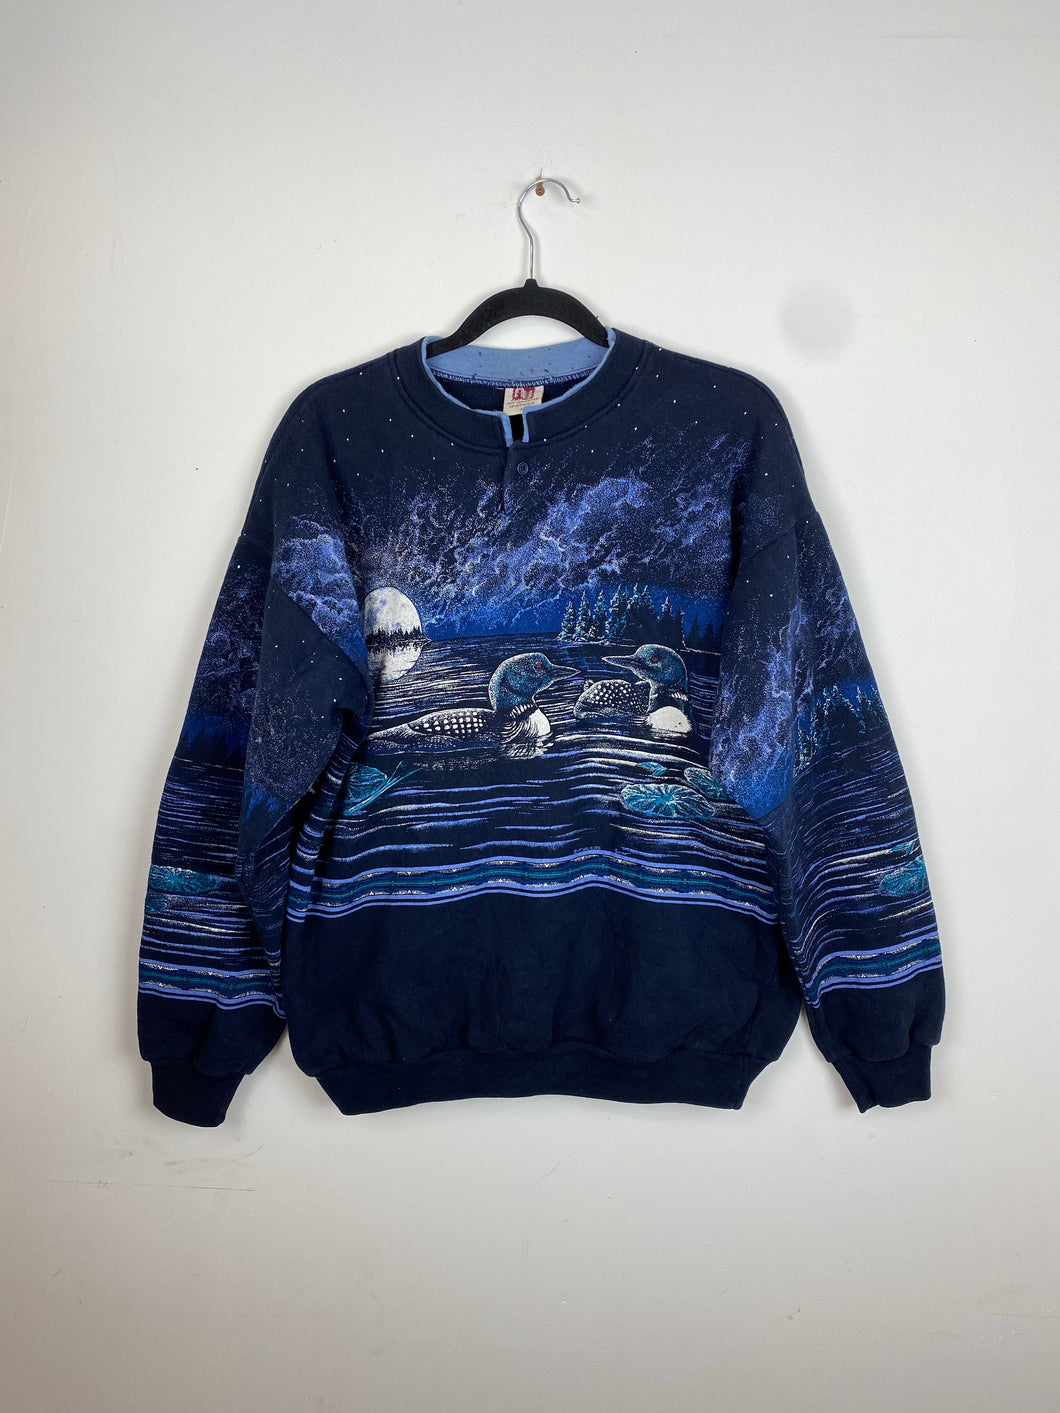 Front and back 90s Loon crewneck